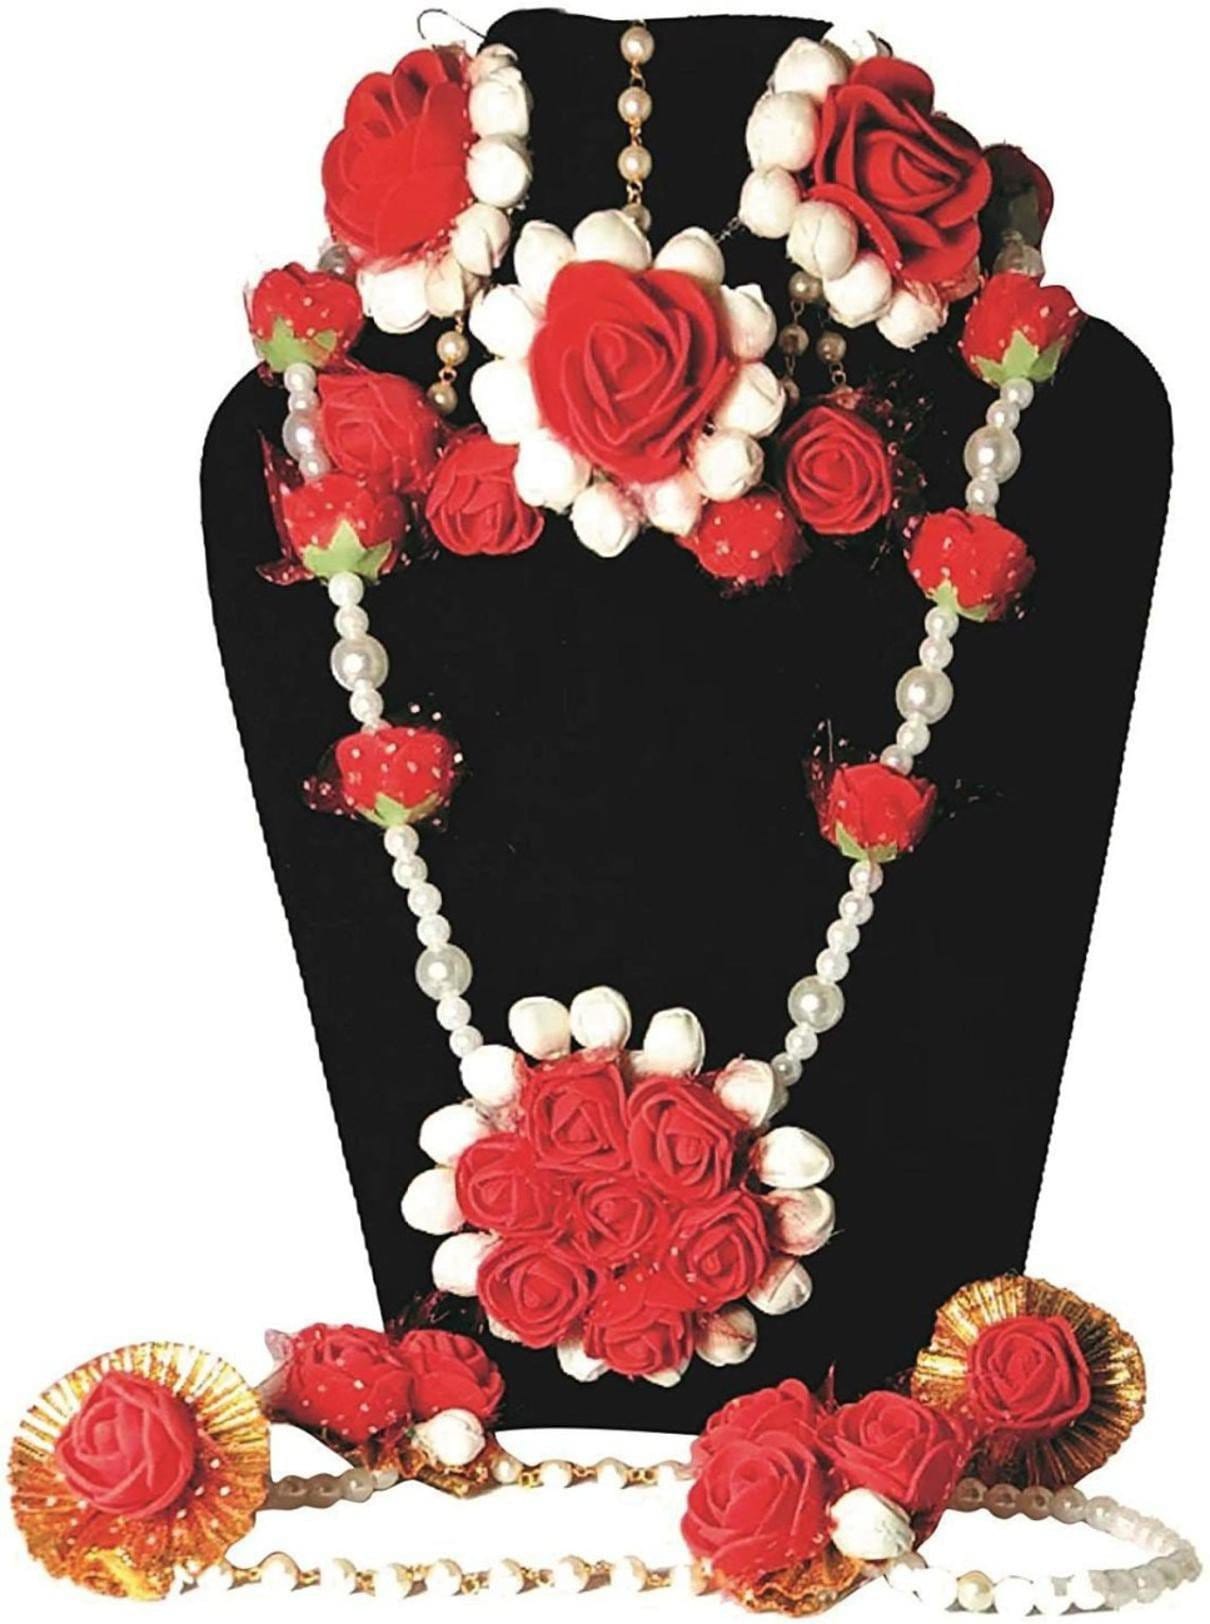 LAMANSH Necklace , Earring, Maangtika Set Red-White / Free Size / Bridal Style New Jaipur Handicraft Artificial Floral Jewellery Set